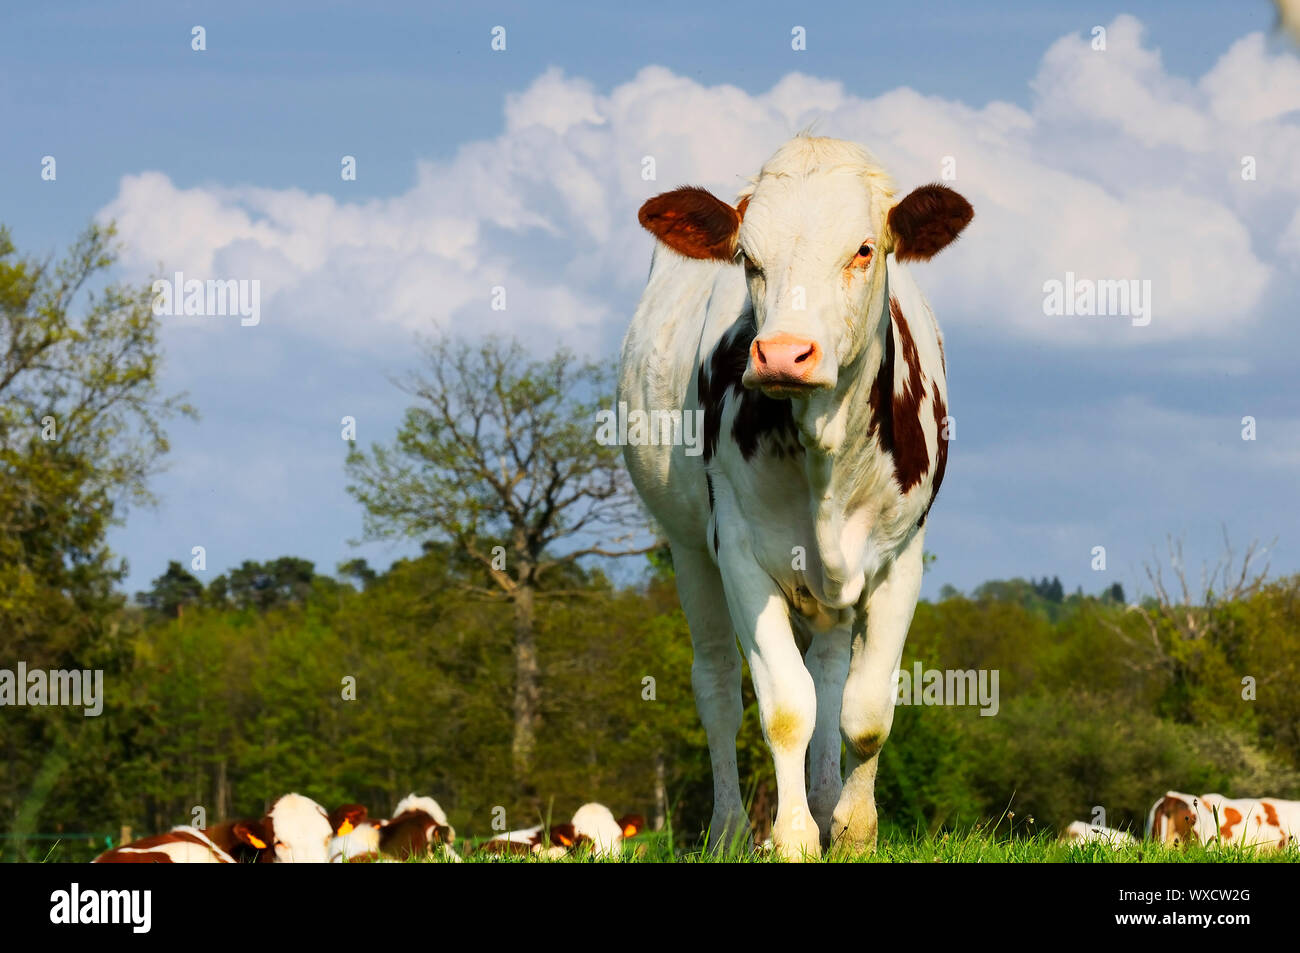 beautiful and curious cow in the landscape, rural situation Stock Photo